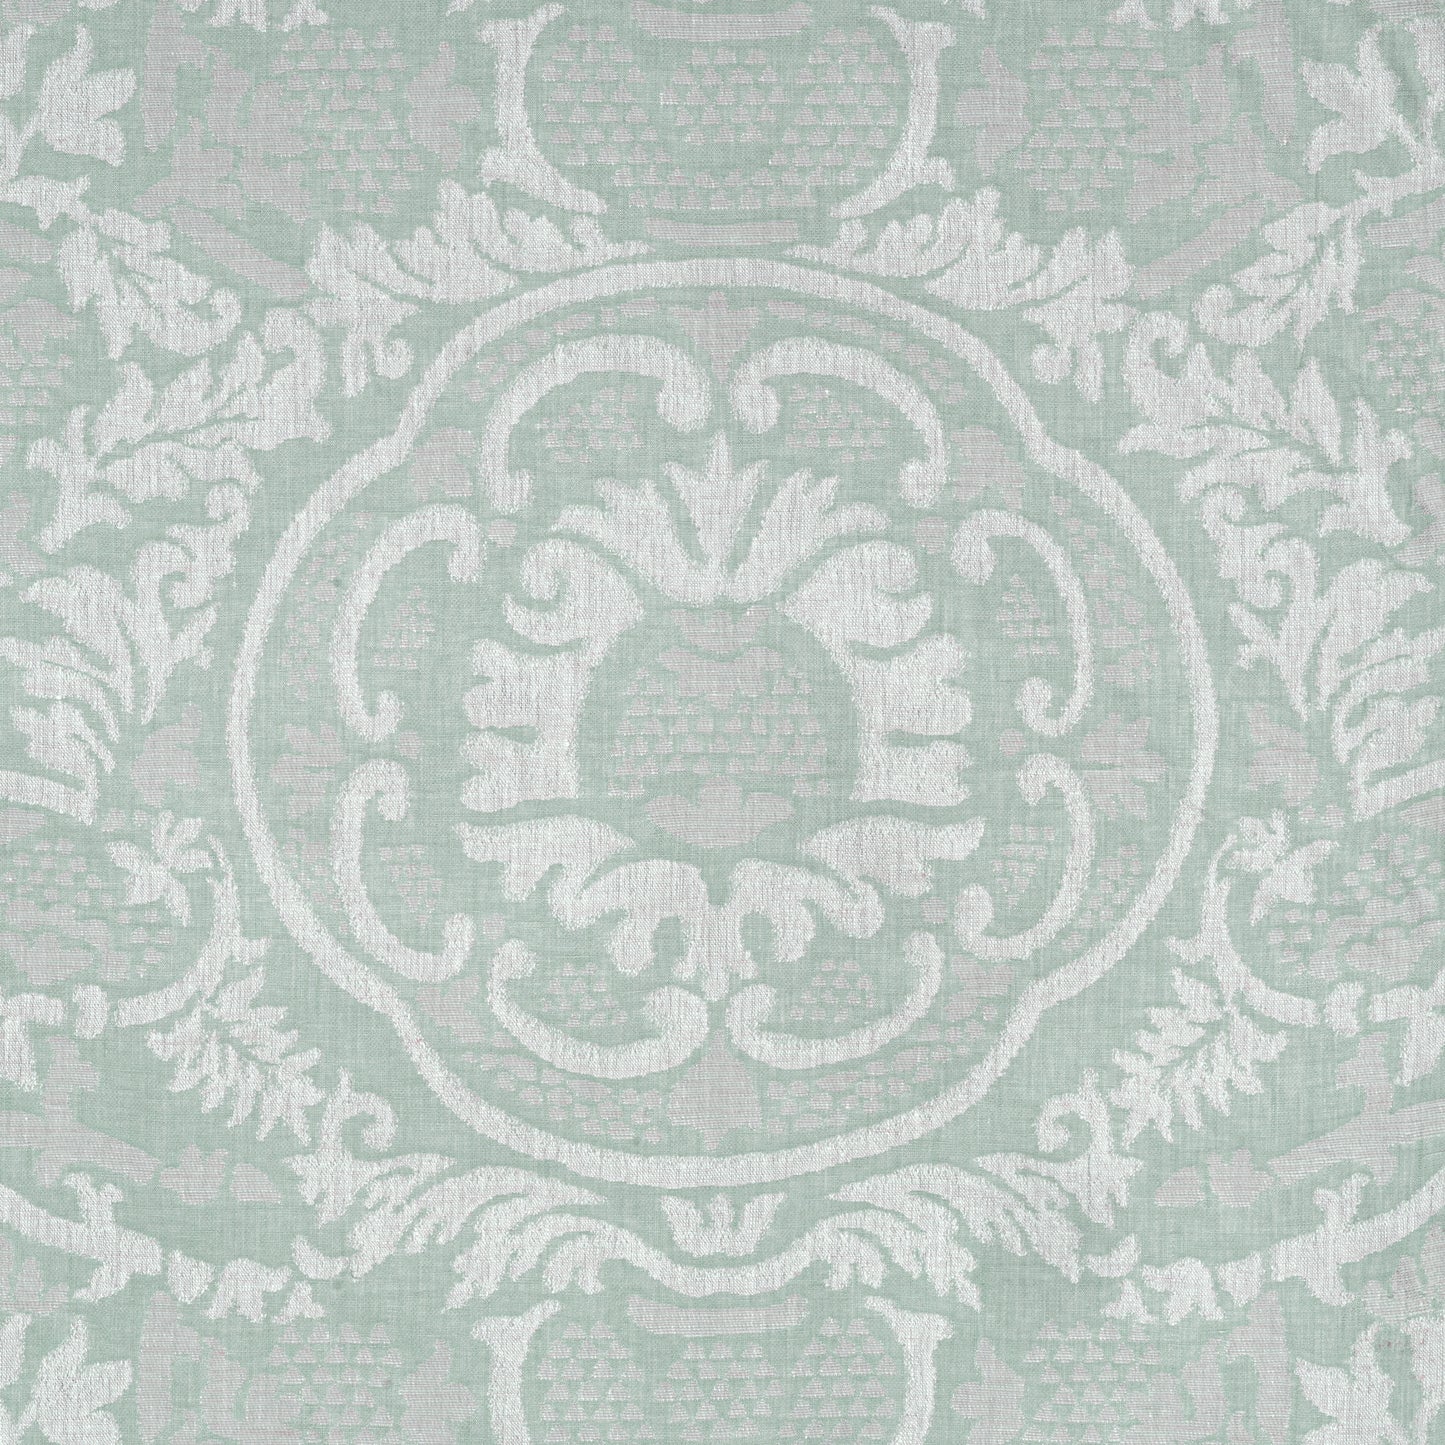 Purchase Thibaut Fabric Item W710839 pattern name Earl Damask color Robin's Egg